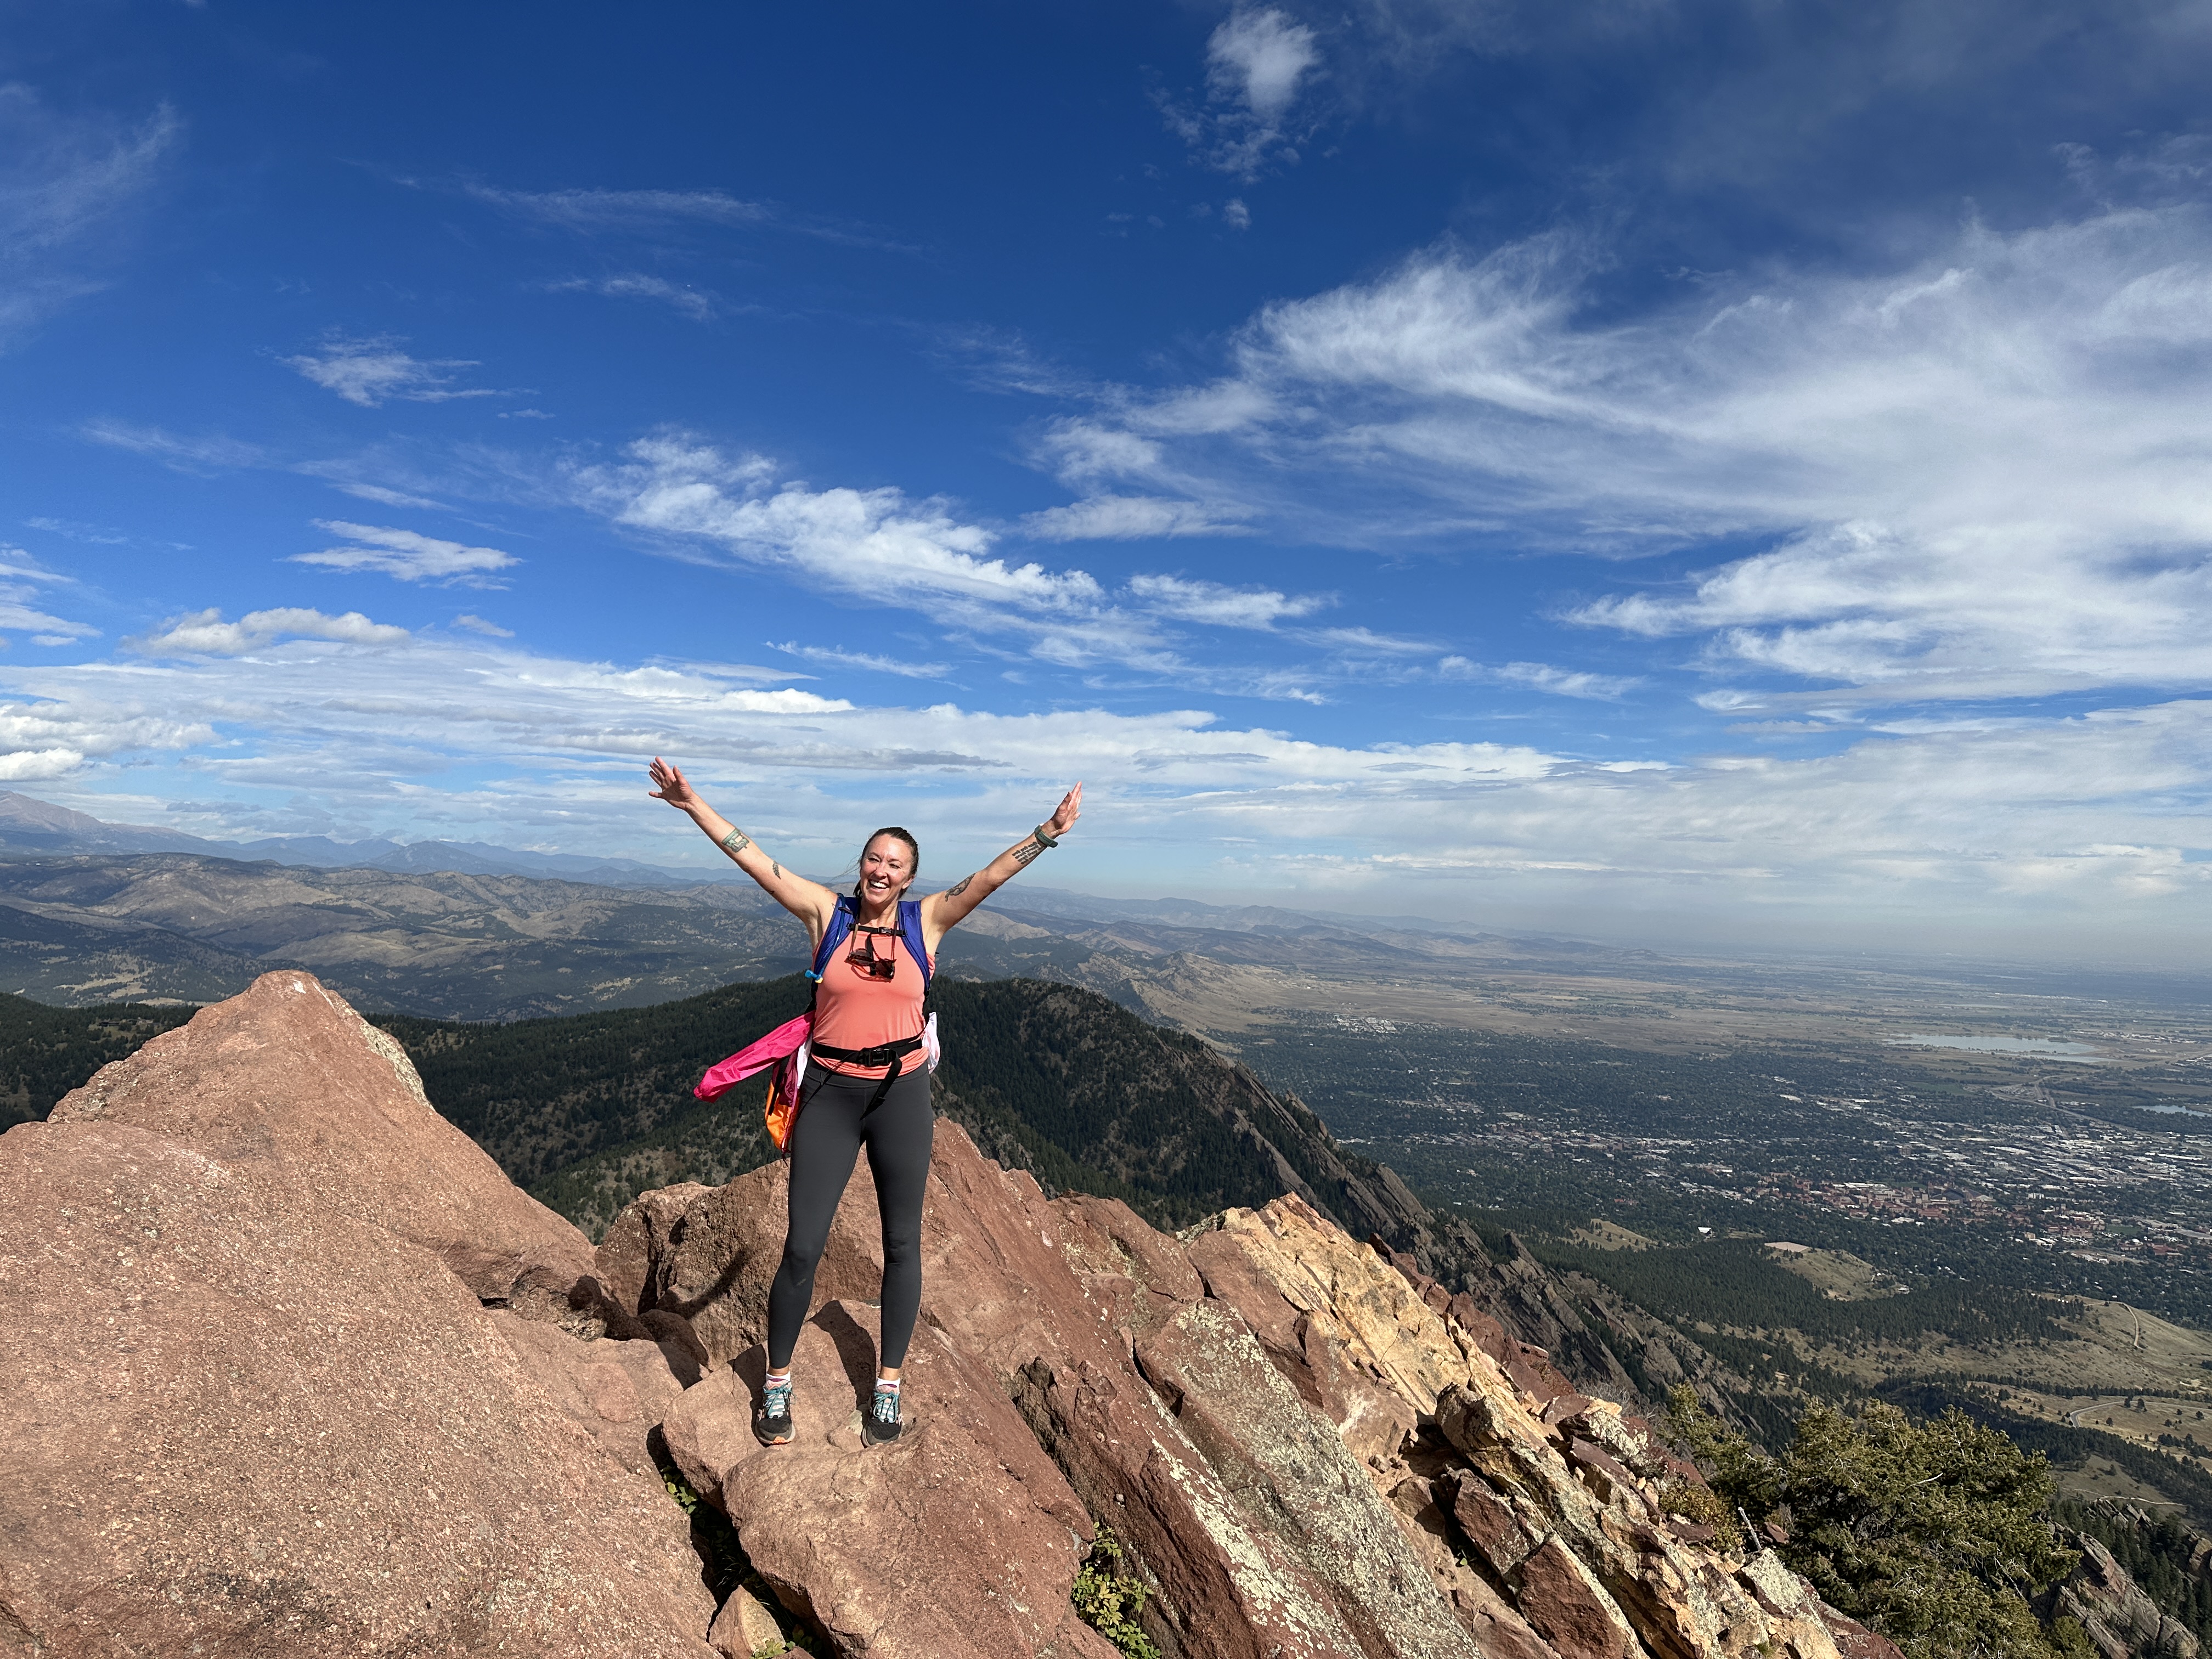 Nicki stands atop the peak of Bear Peak, which is an excellent hike near Boulder.